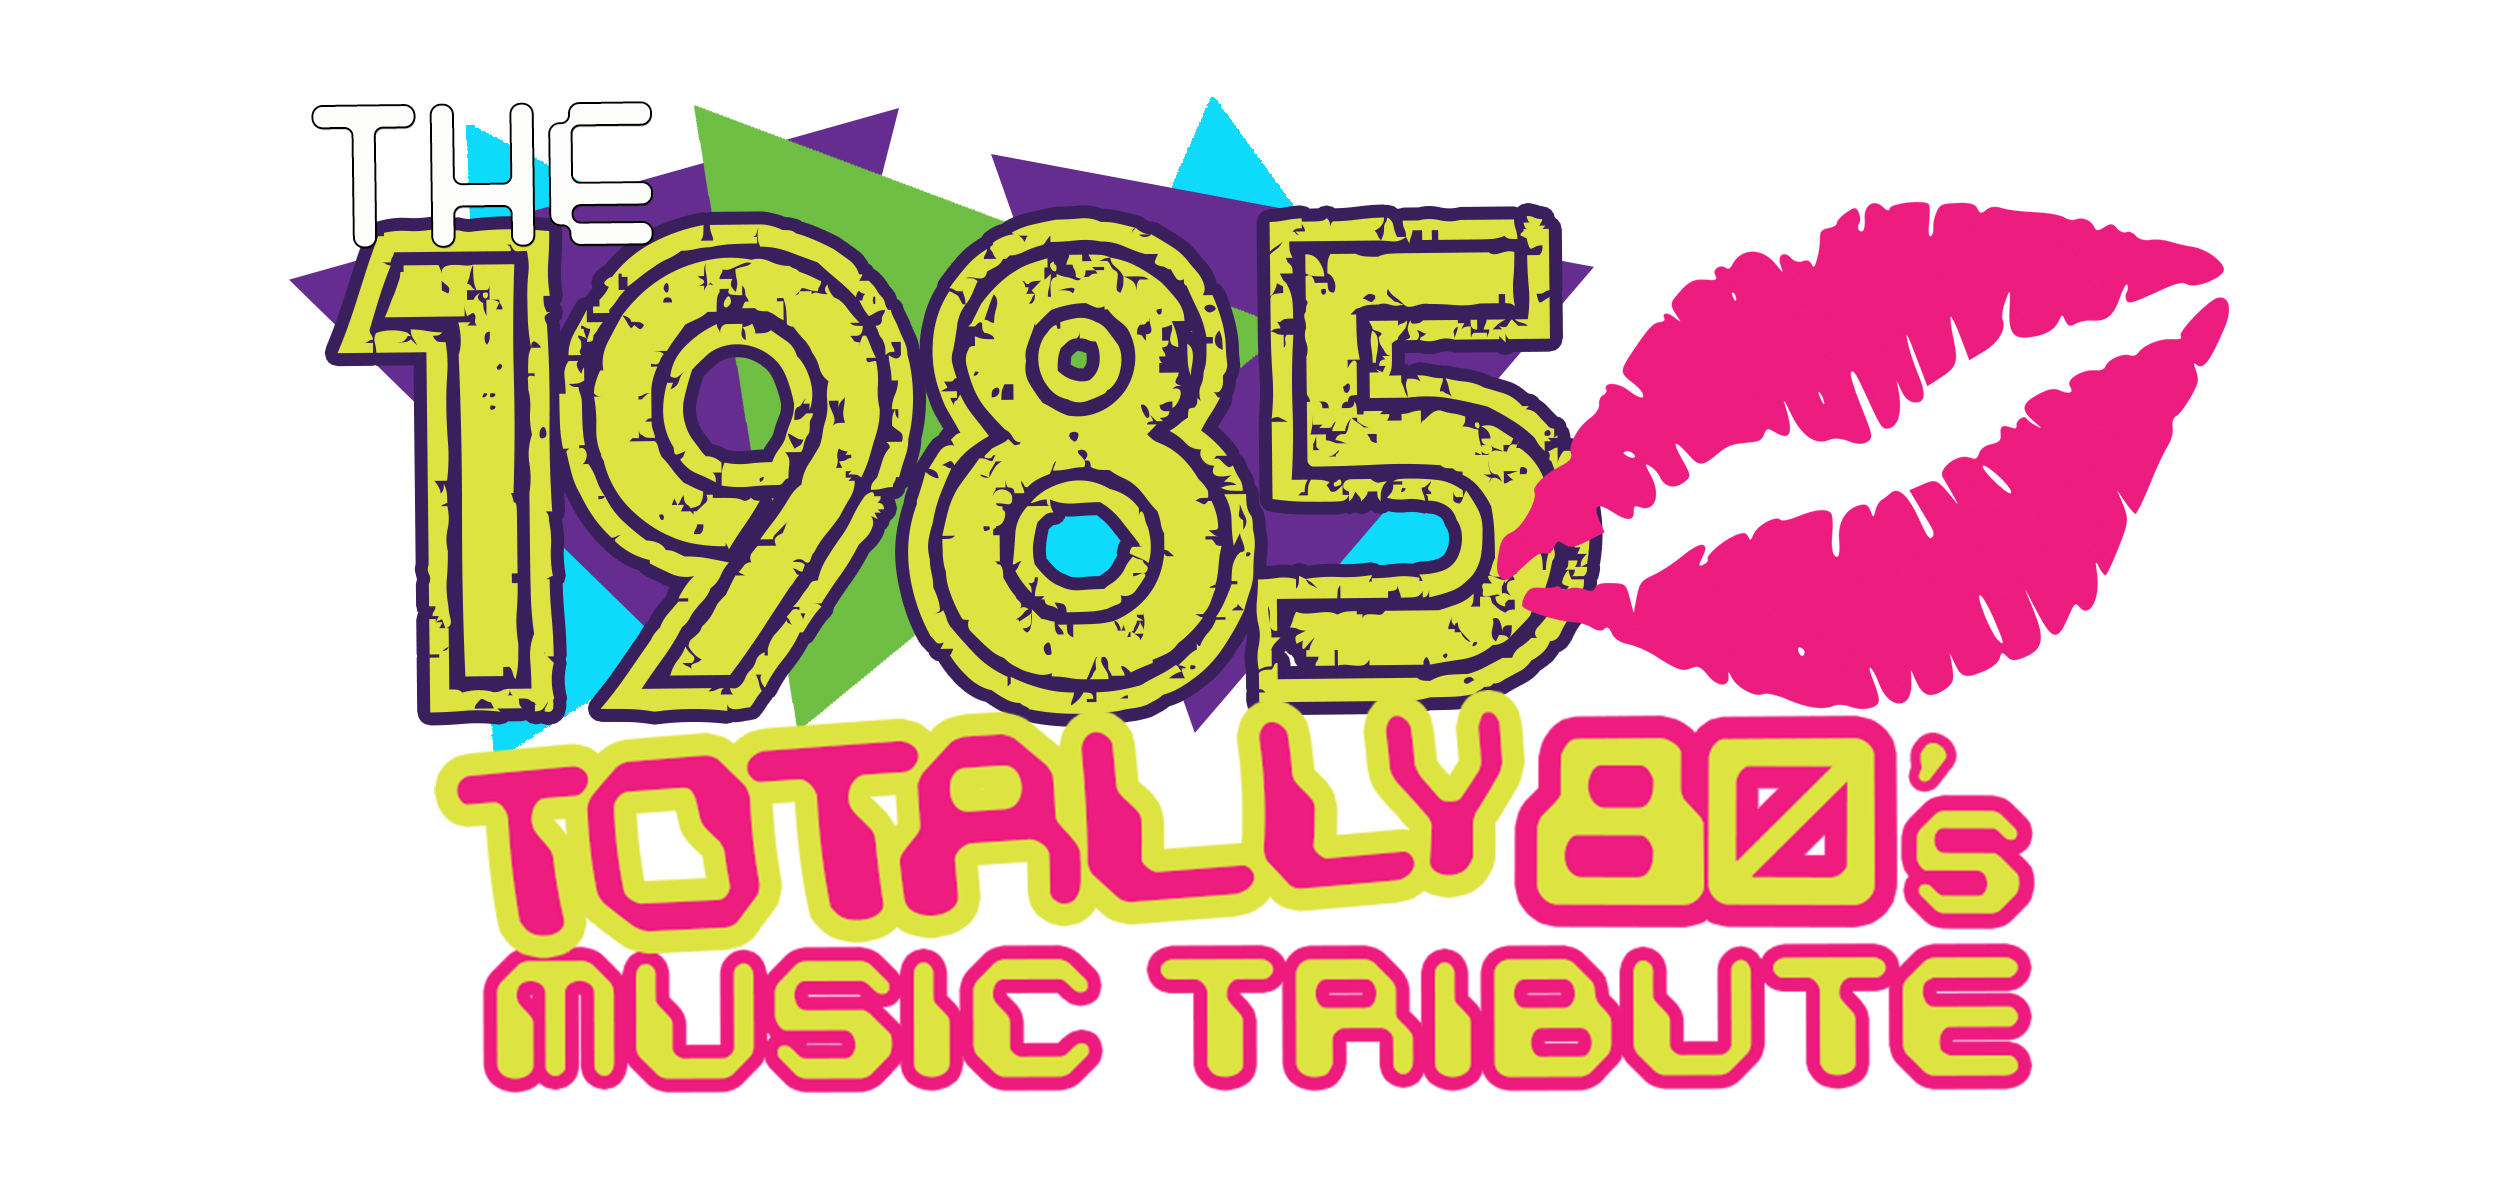 The 1985 - Totally 80's Music Tribute!